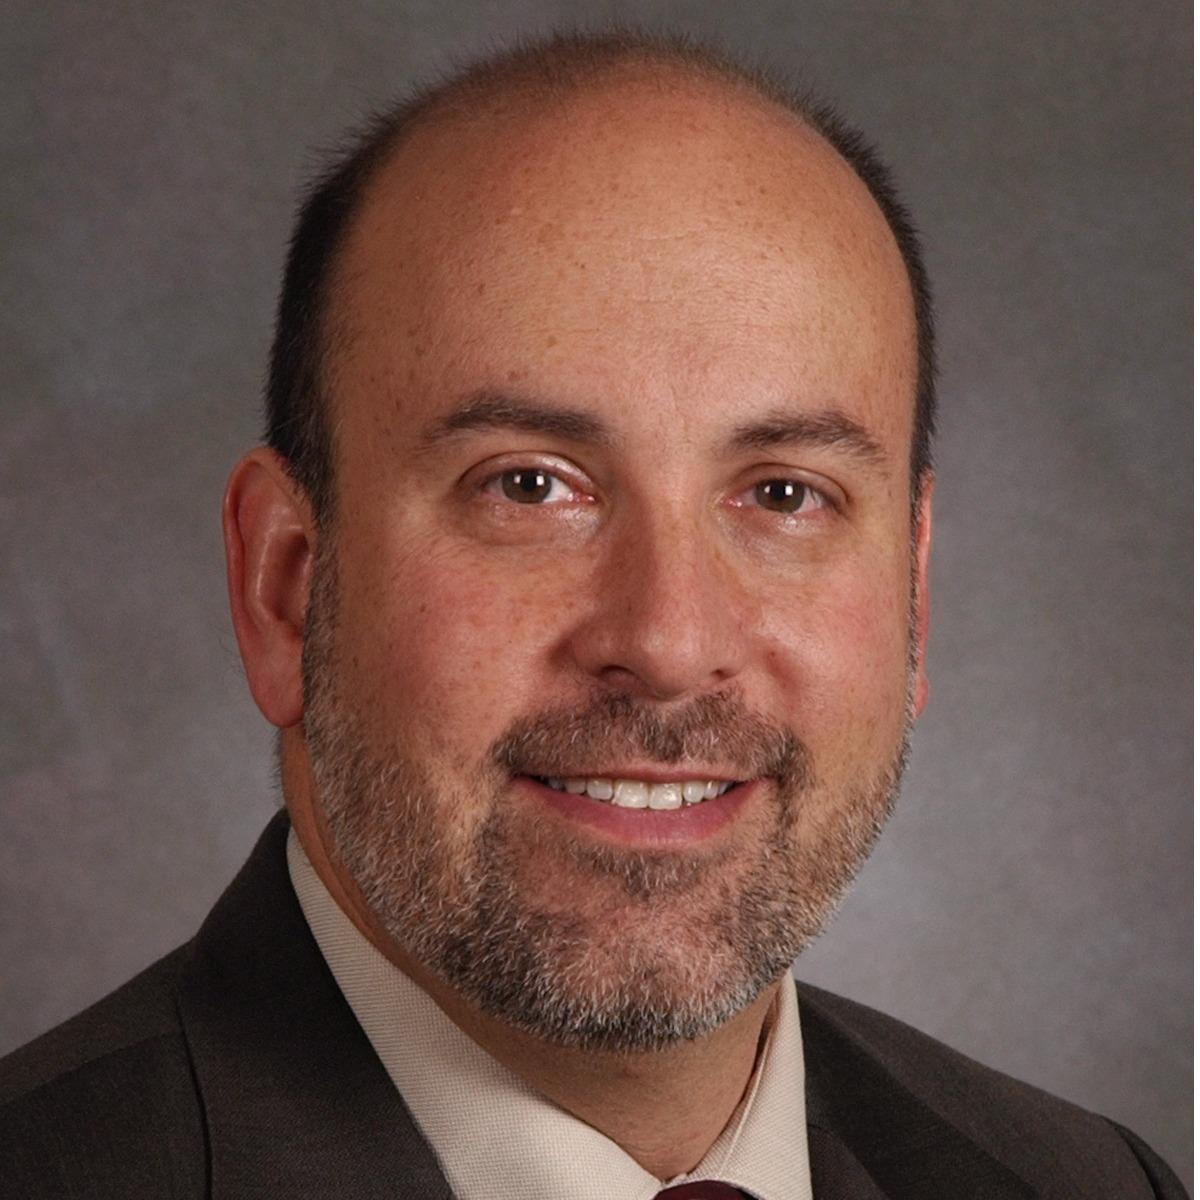 Dr. Gutman has expertise in all areas of neurosurgery and is the Director of the Inpatient Floor service for The Department of Neurosurgery. He works closely with the Advanced Practice Provider (NP/PA) staff to review and improve the delivery of care to neurosurgery patients in the hospital.